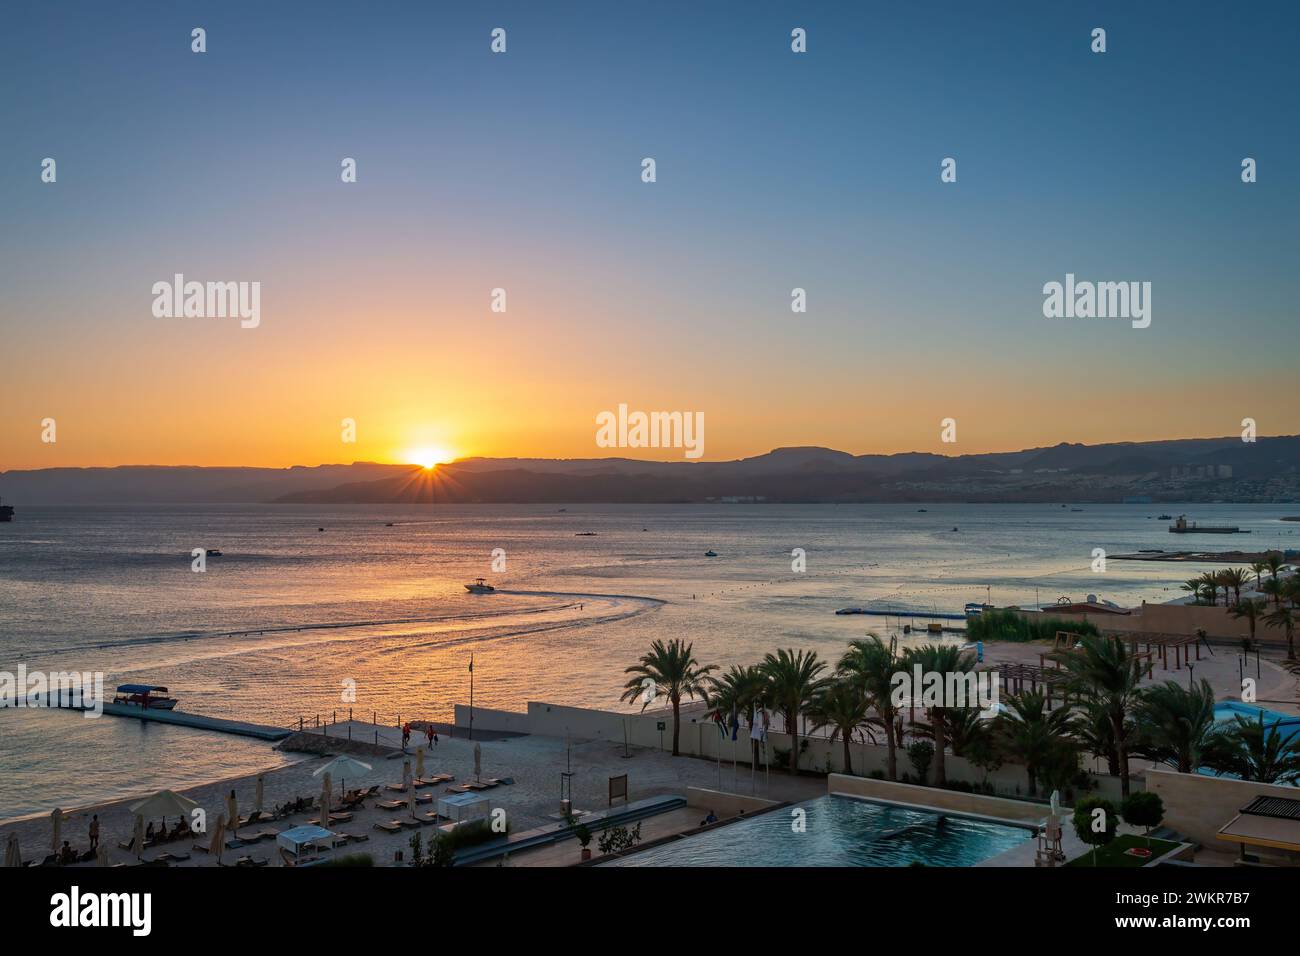 Scenic view of swimming pool and beach at Gulf of Aqaba in Aqaba, Jordan at sunset Stock Photo